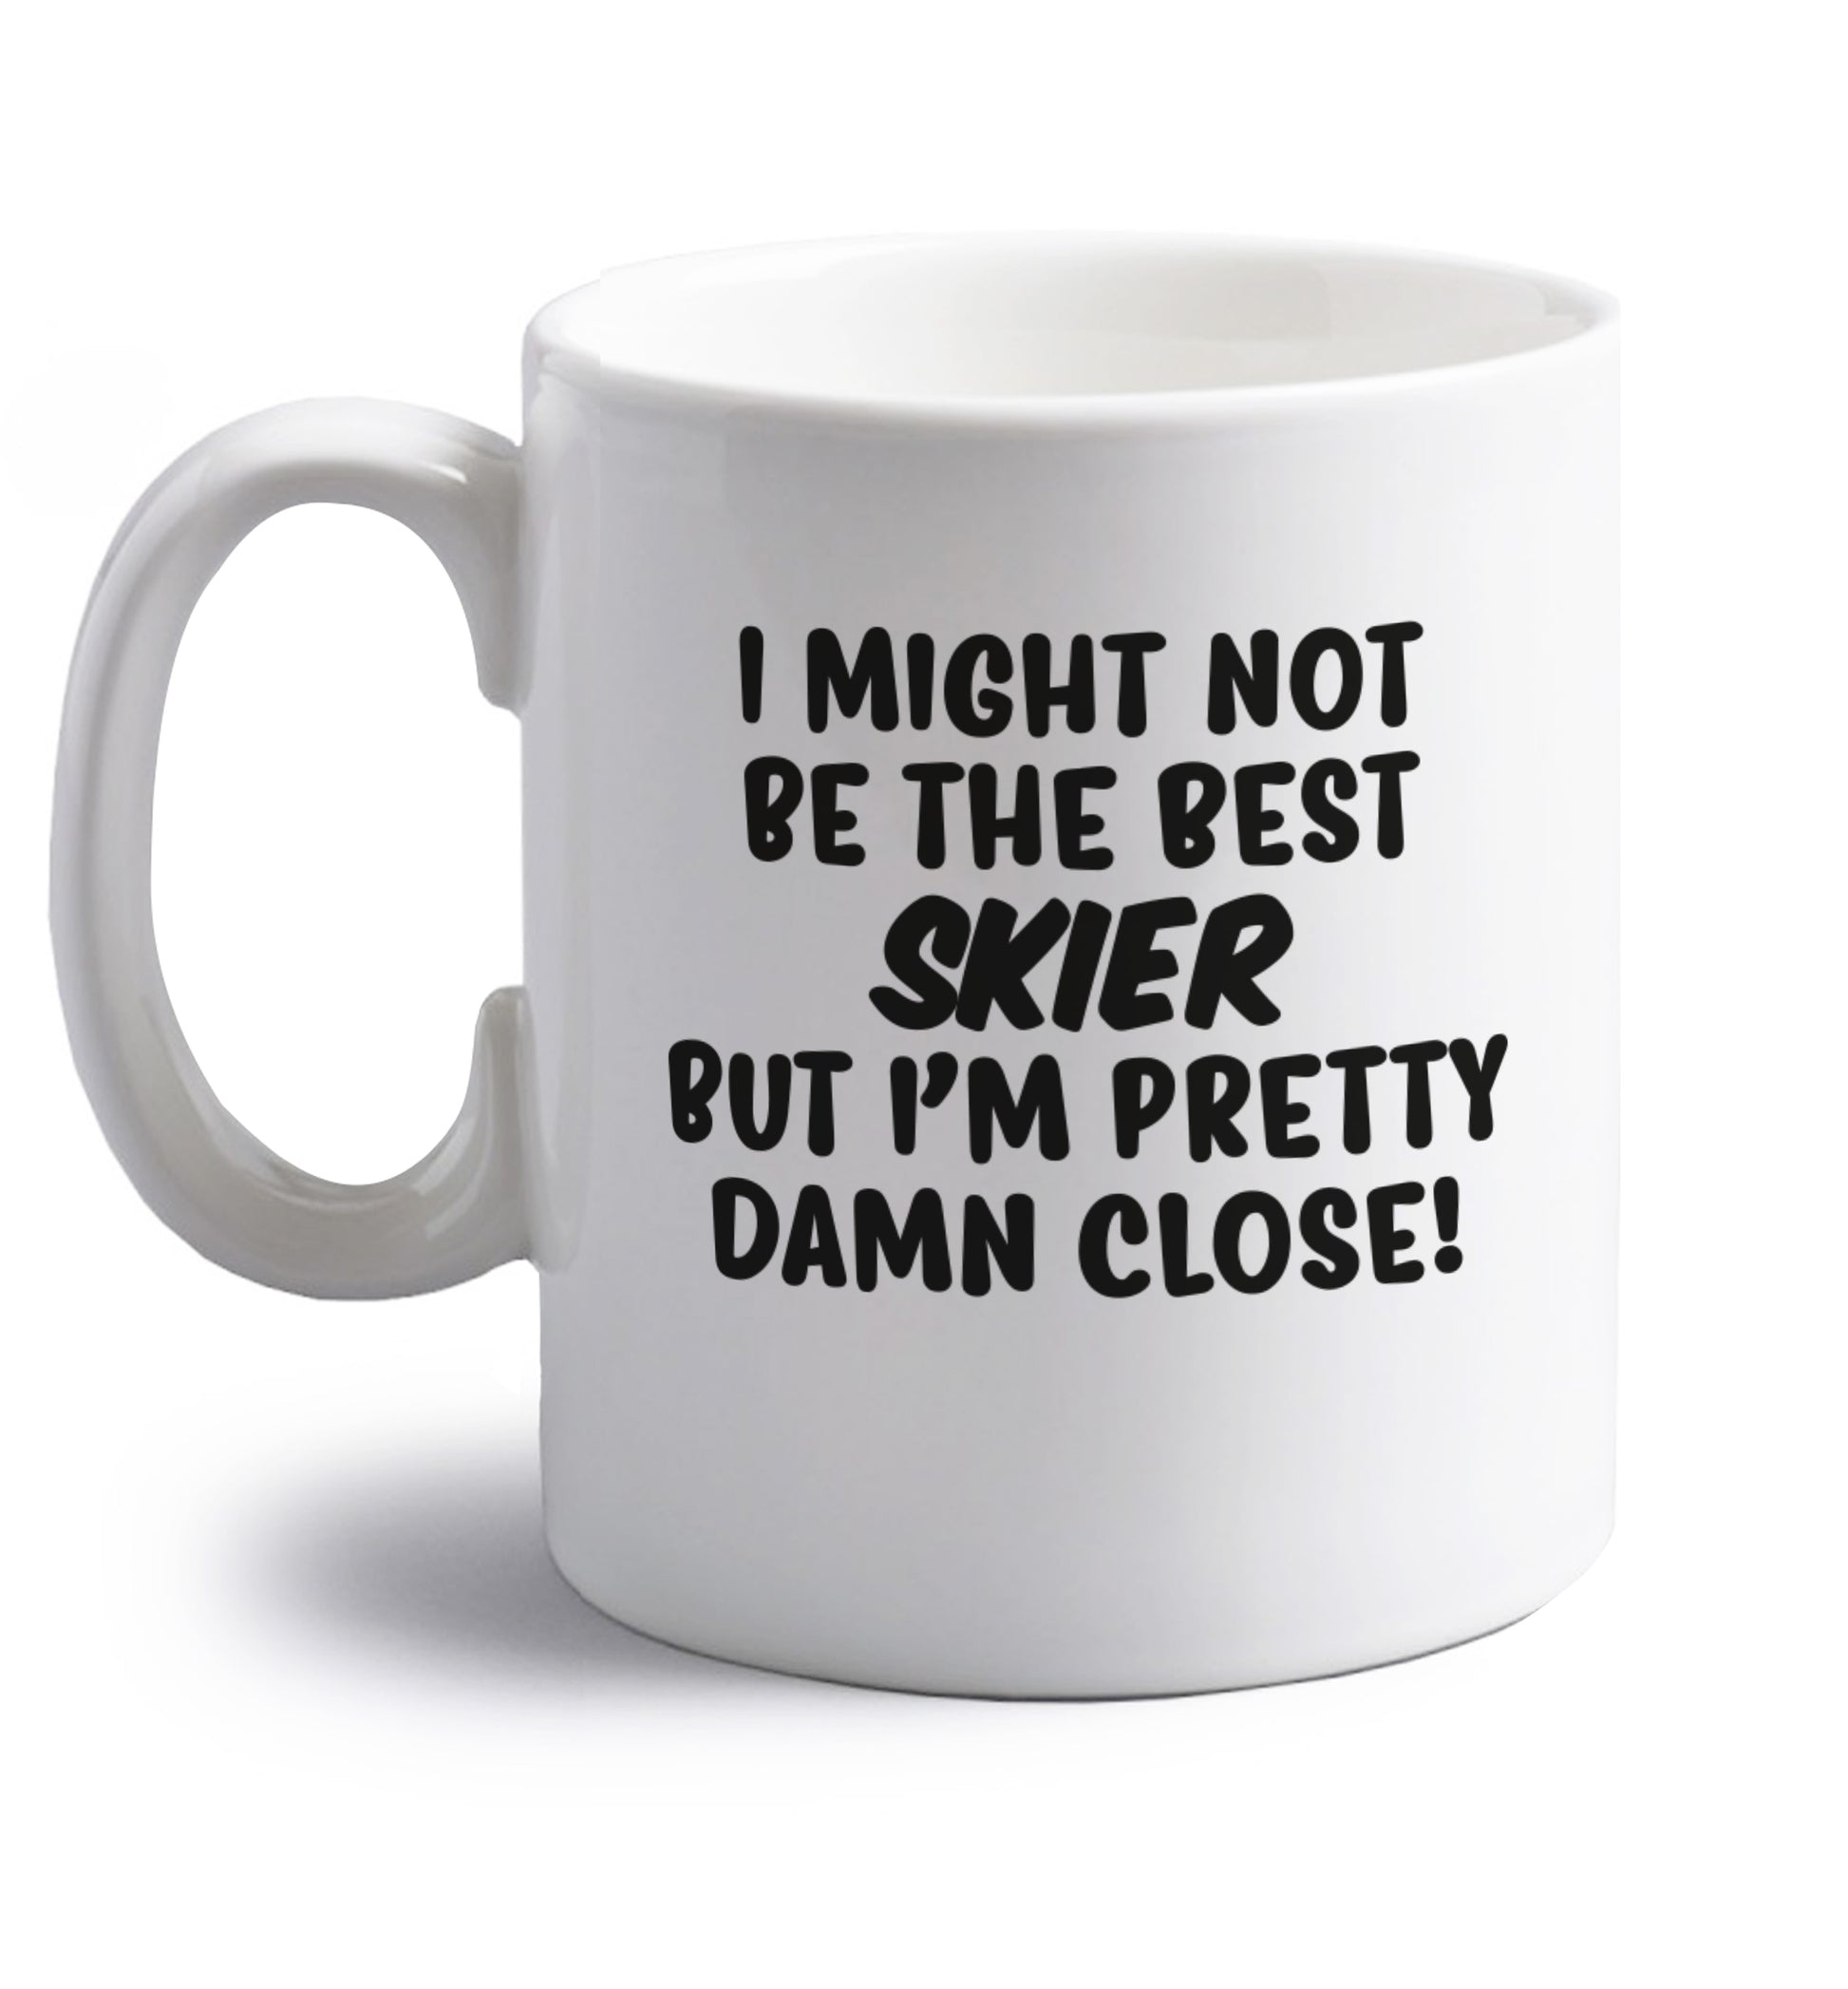 I might not be the best skier but I'm pretty damn close! right handed white ceramic mug 